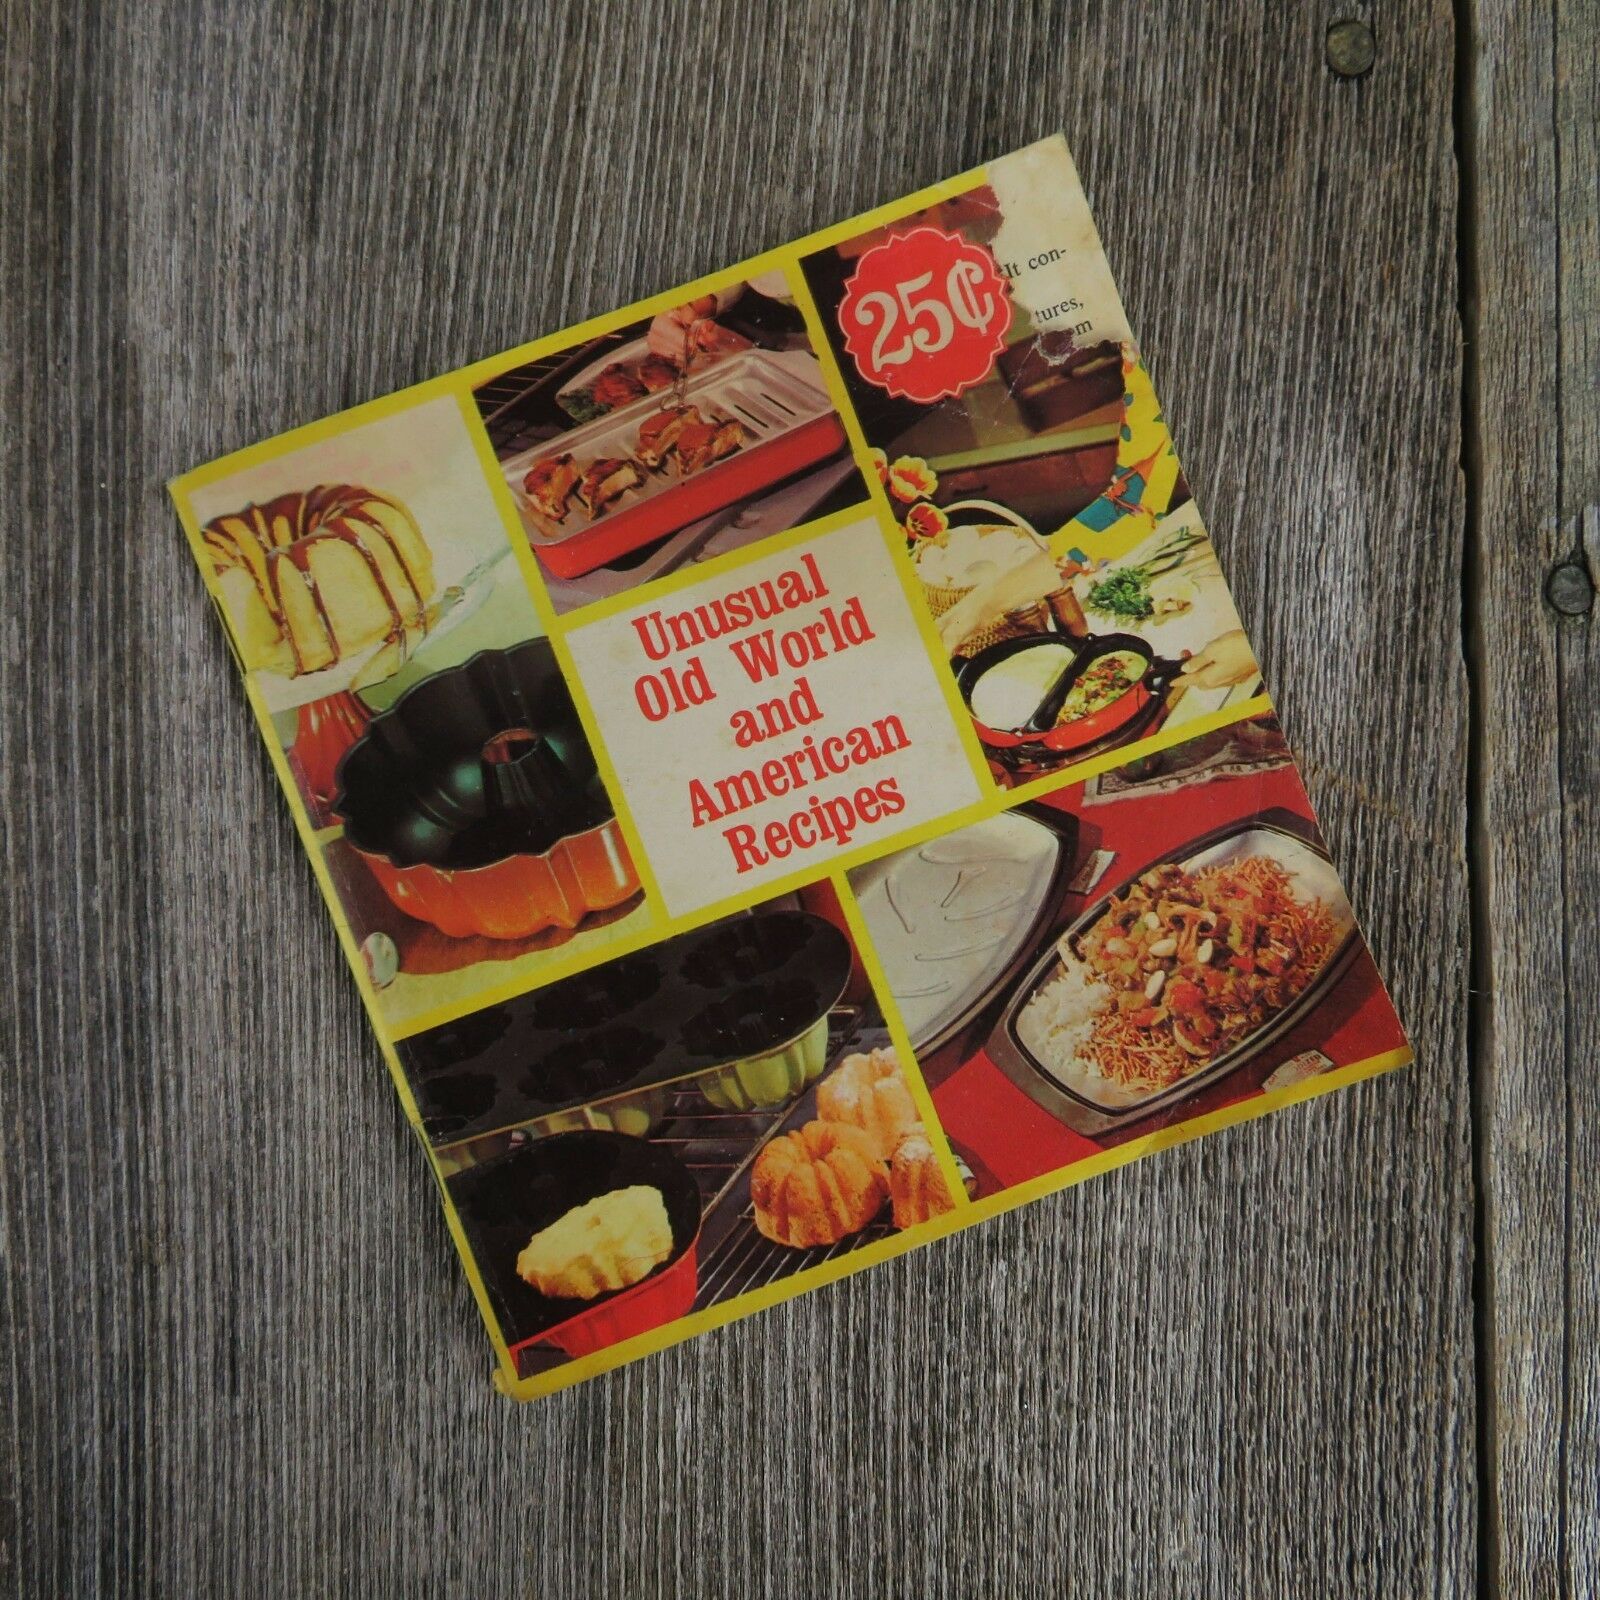 Nordic Ware Unusual Old World and American Recipes Cookbook The Bundt People - At Grandma's Table